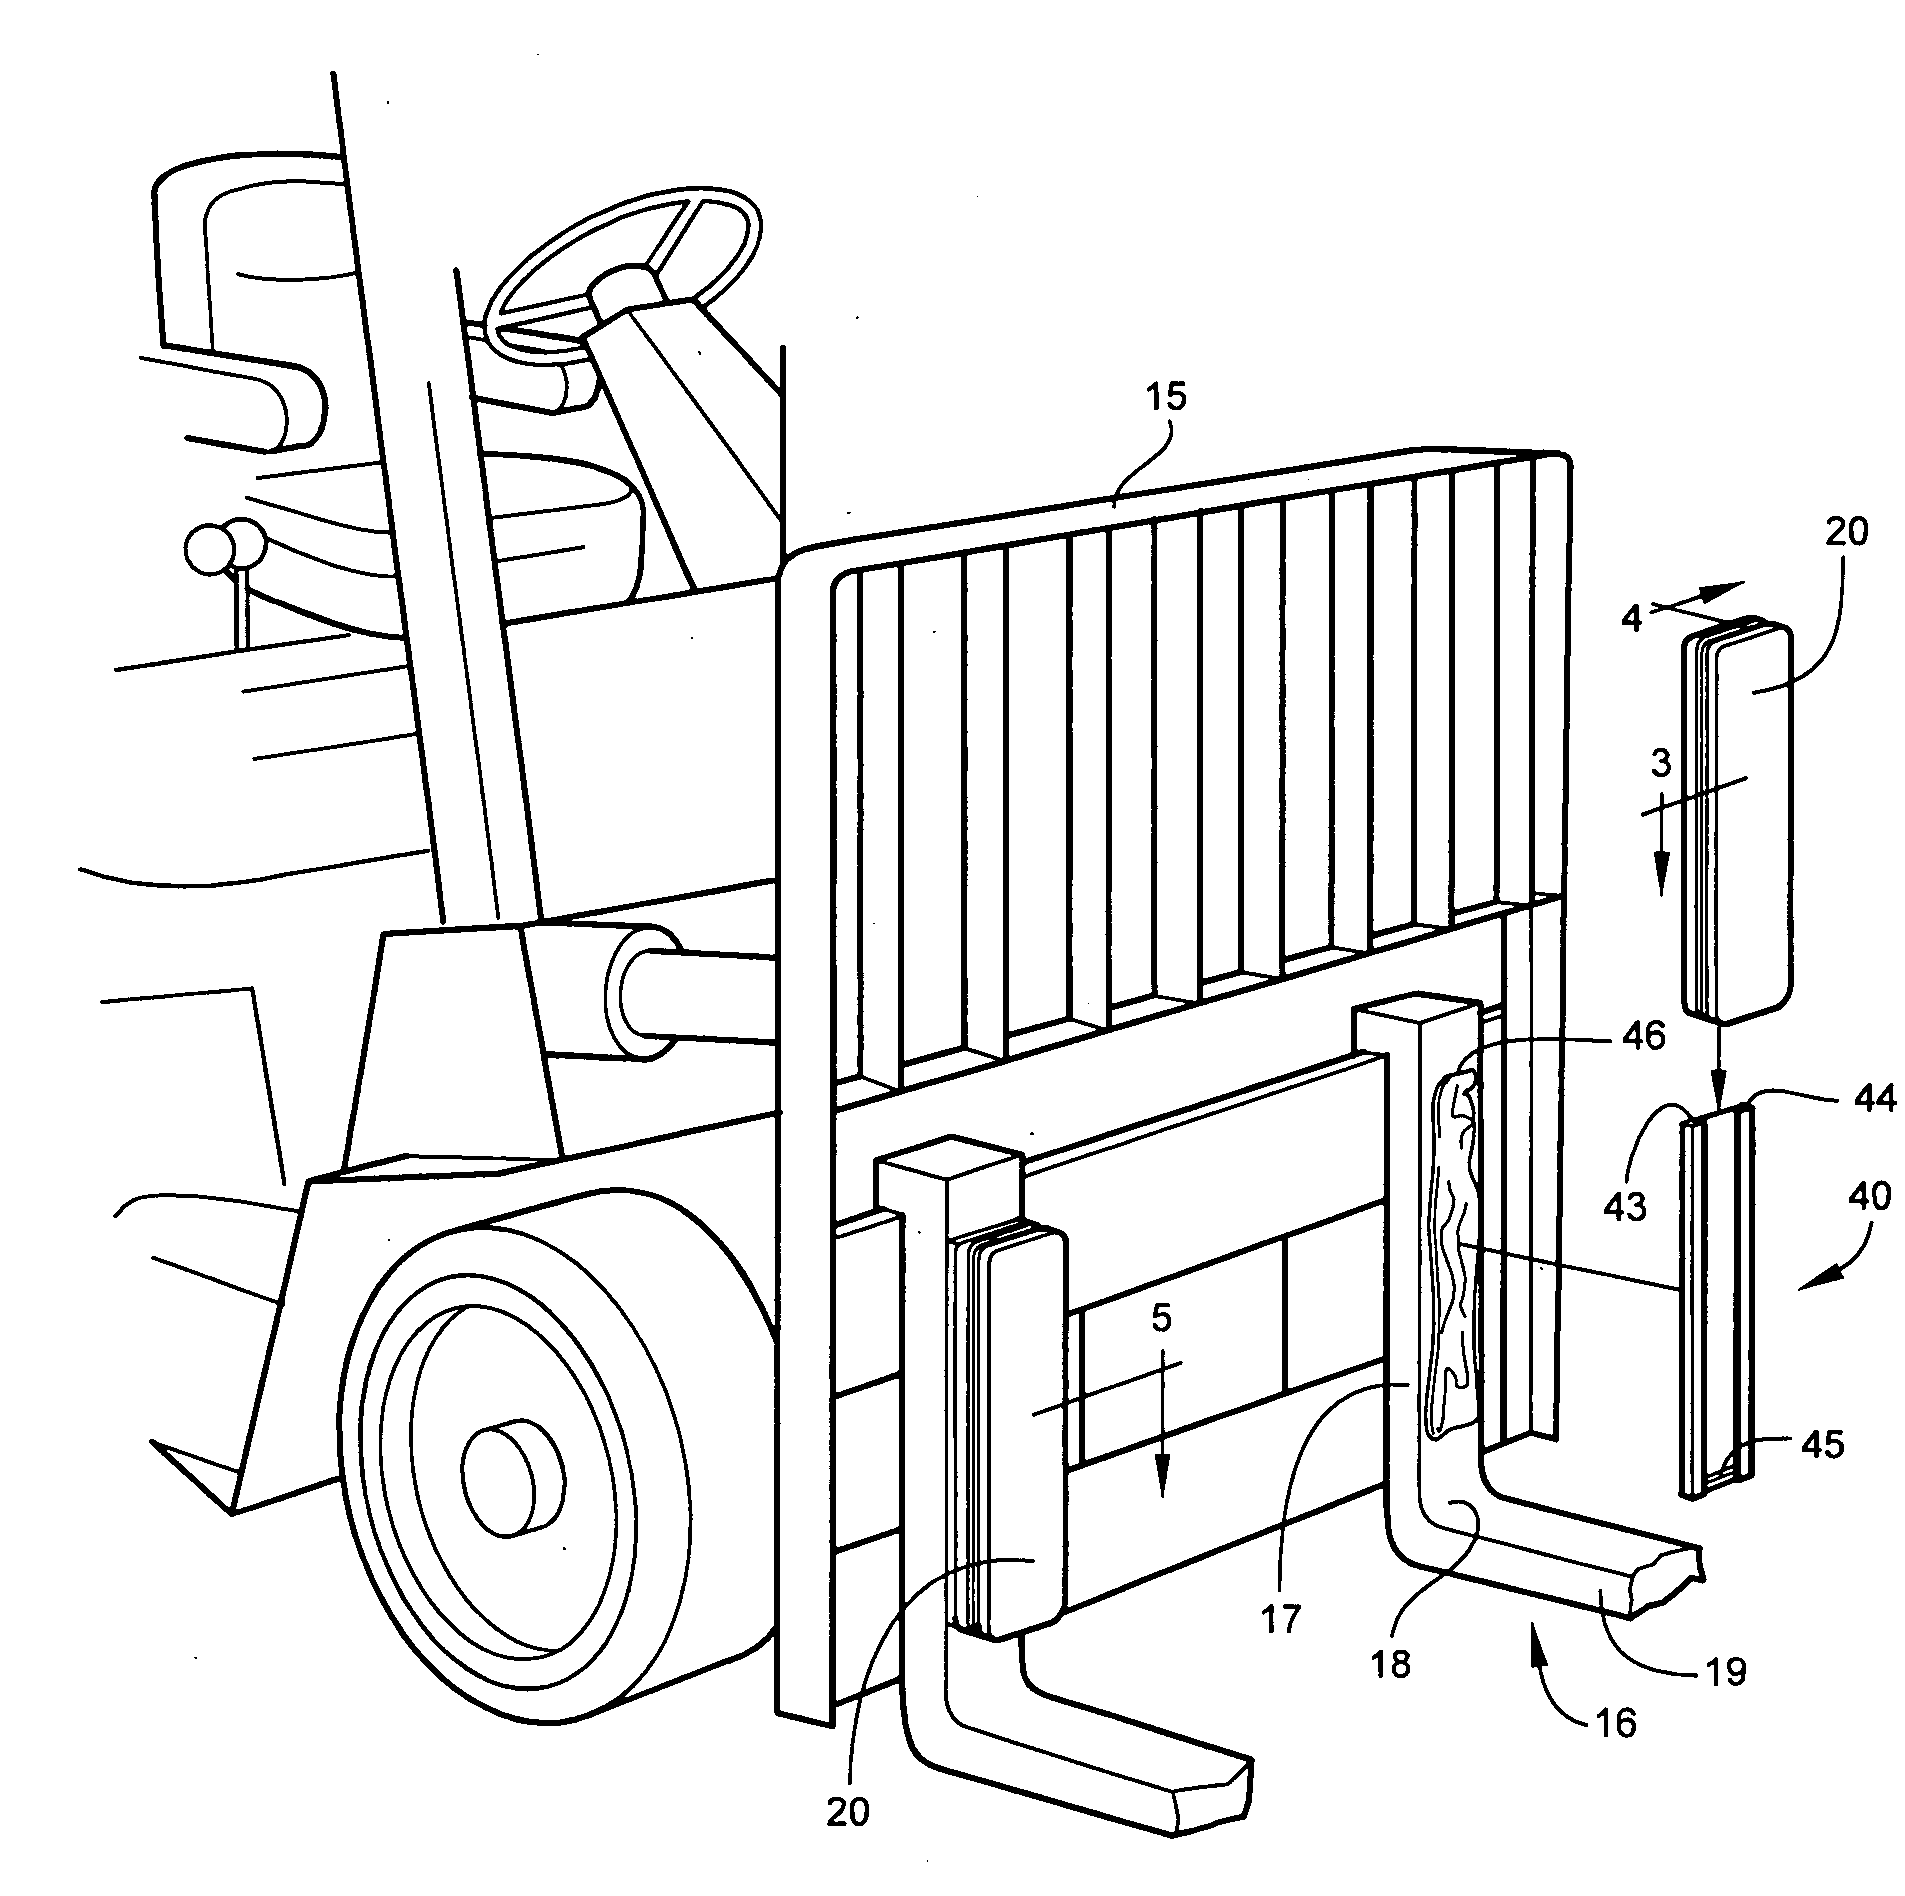 Protective bumper adapted for minimizing damage to materials carried by a materials handling vehicle